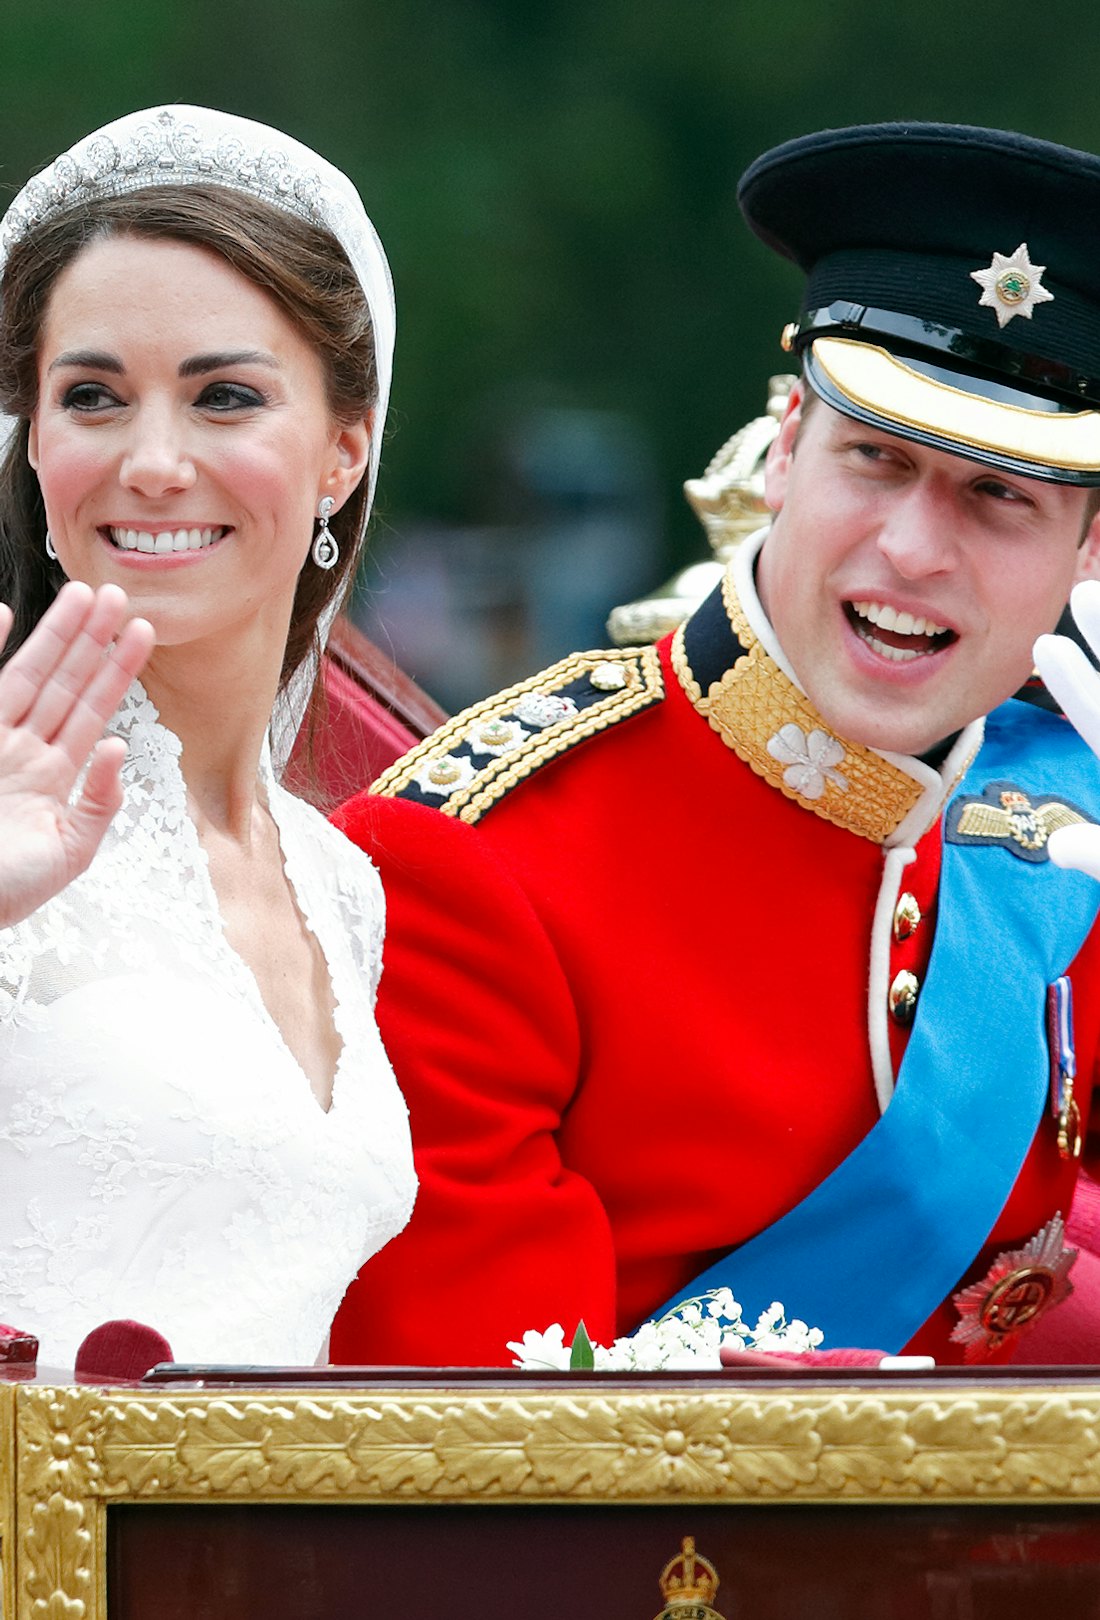 The Prince William & Kate Middleton Wedding Moments You Forgot About